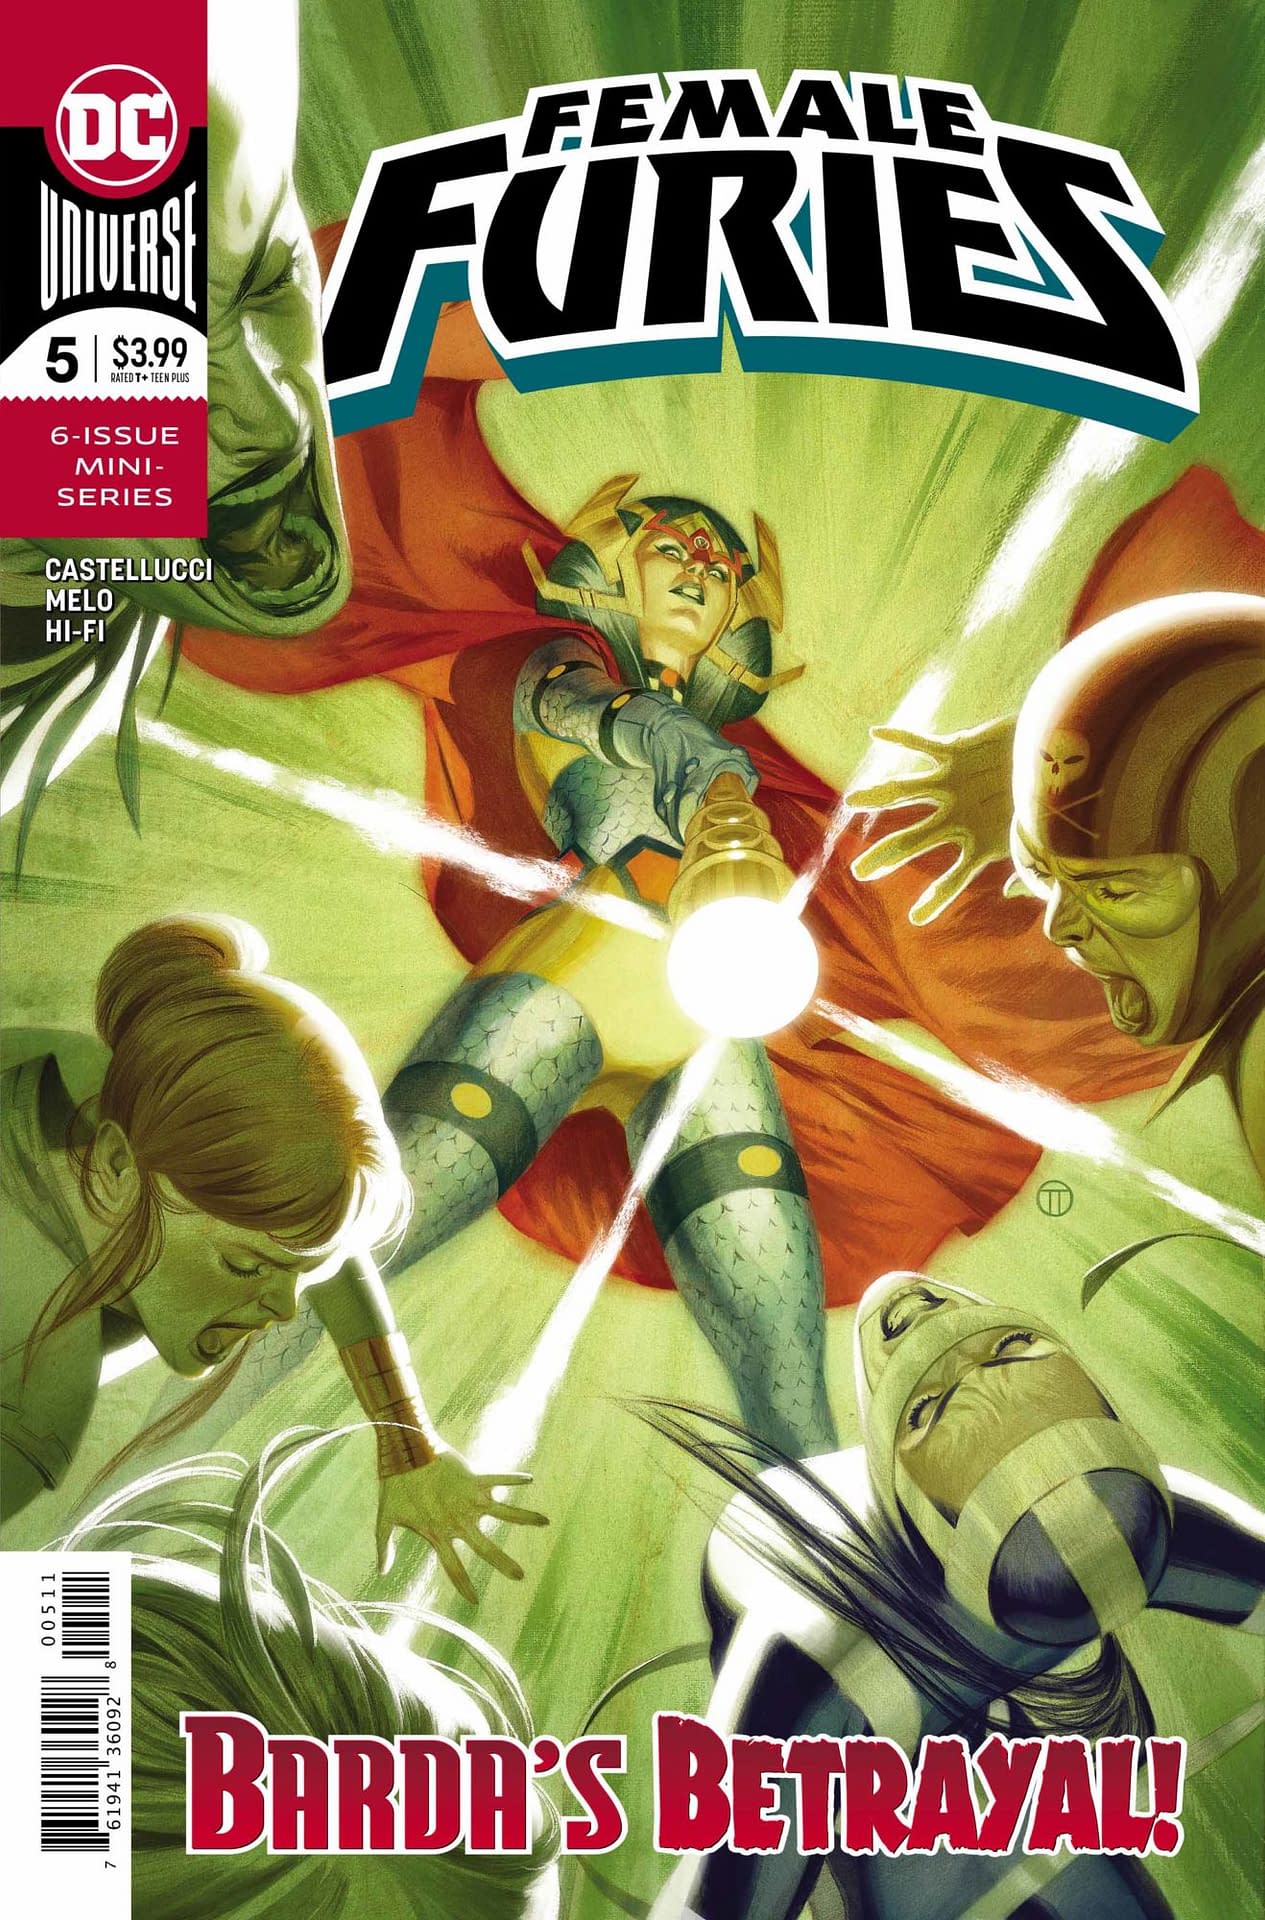 The Female Furies Come to Earth in Female Furies #5 Preview